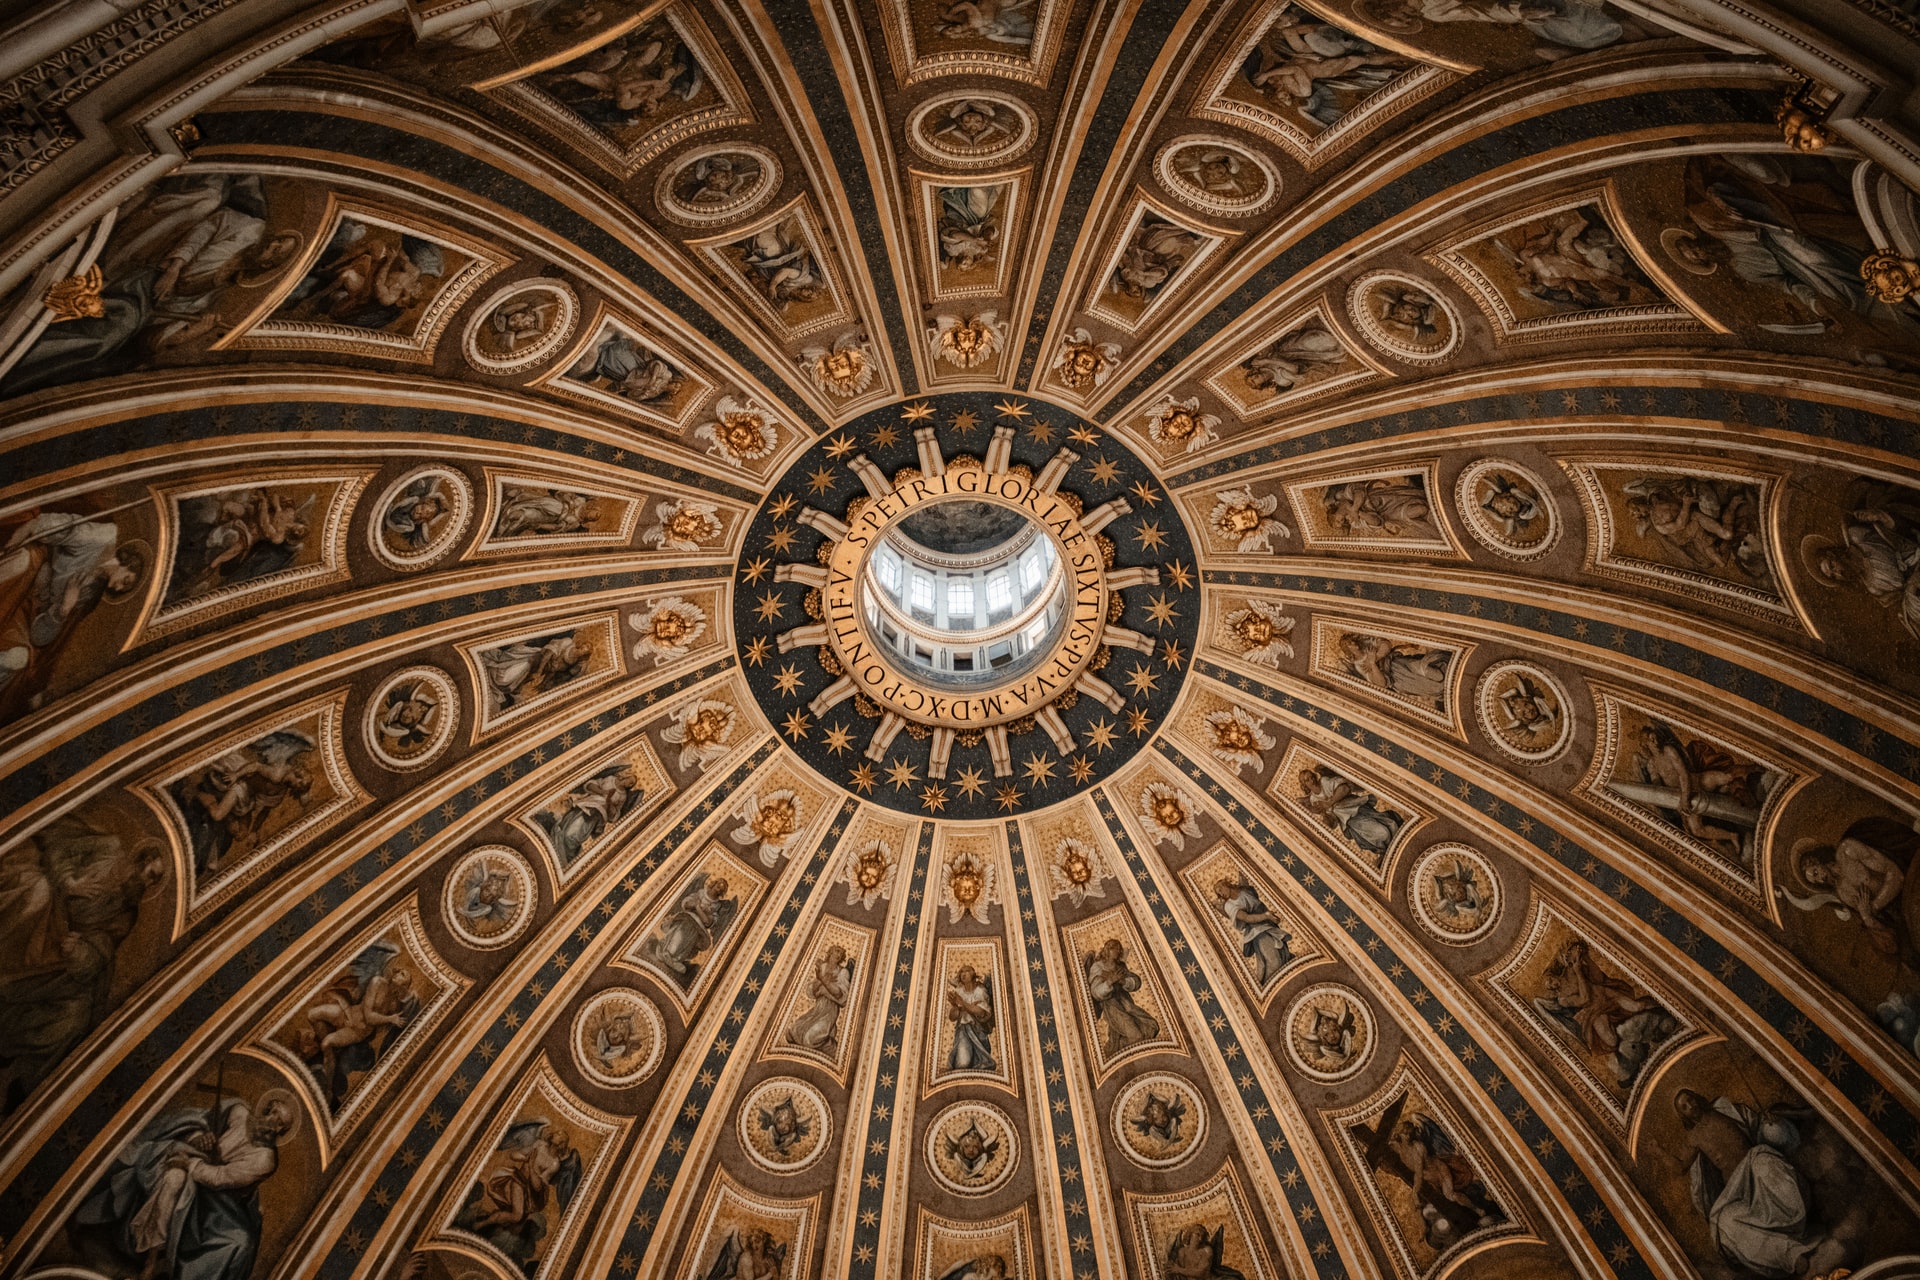 The Dome of St. Peter's Basilica